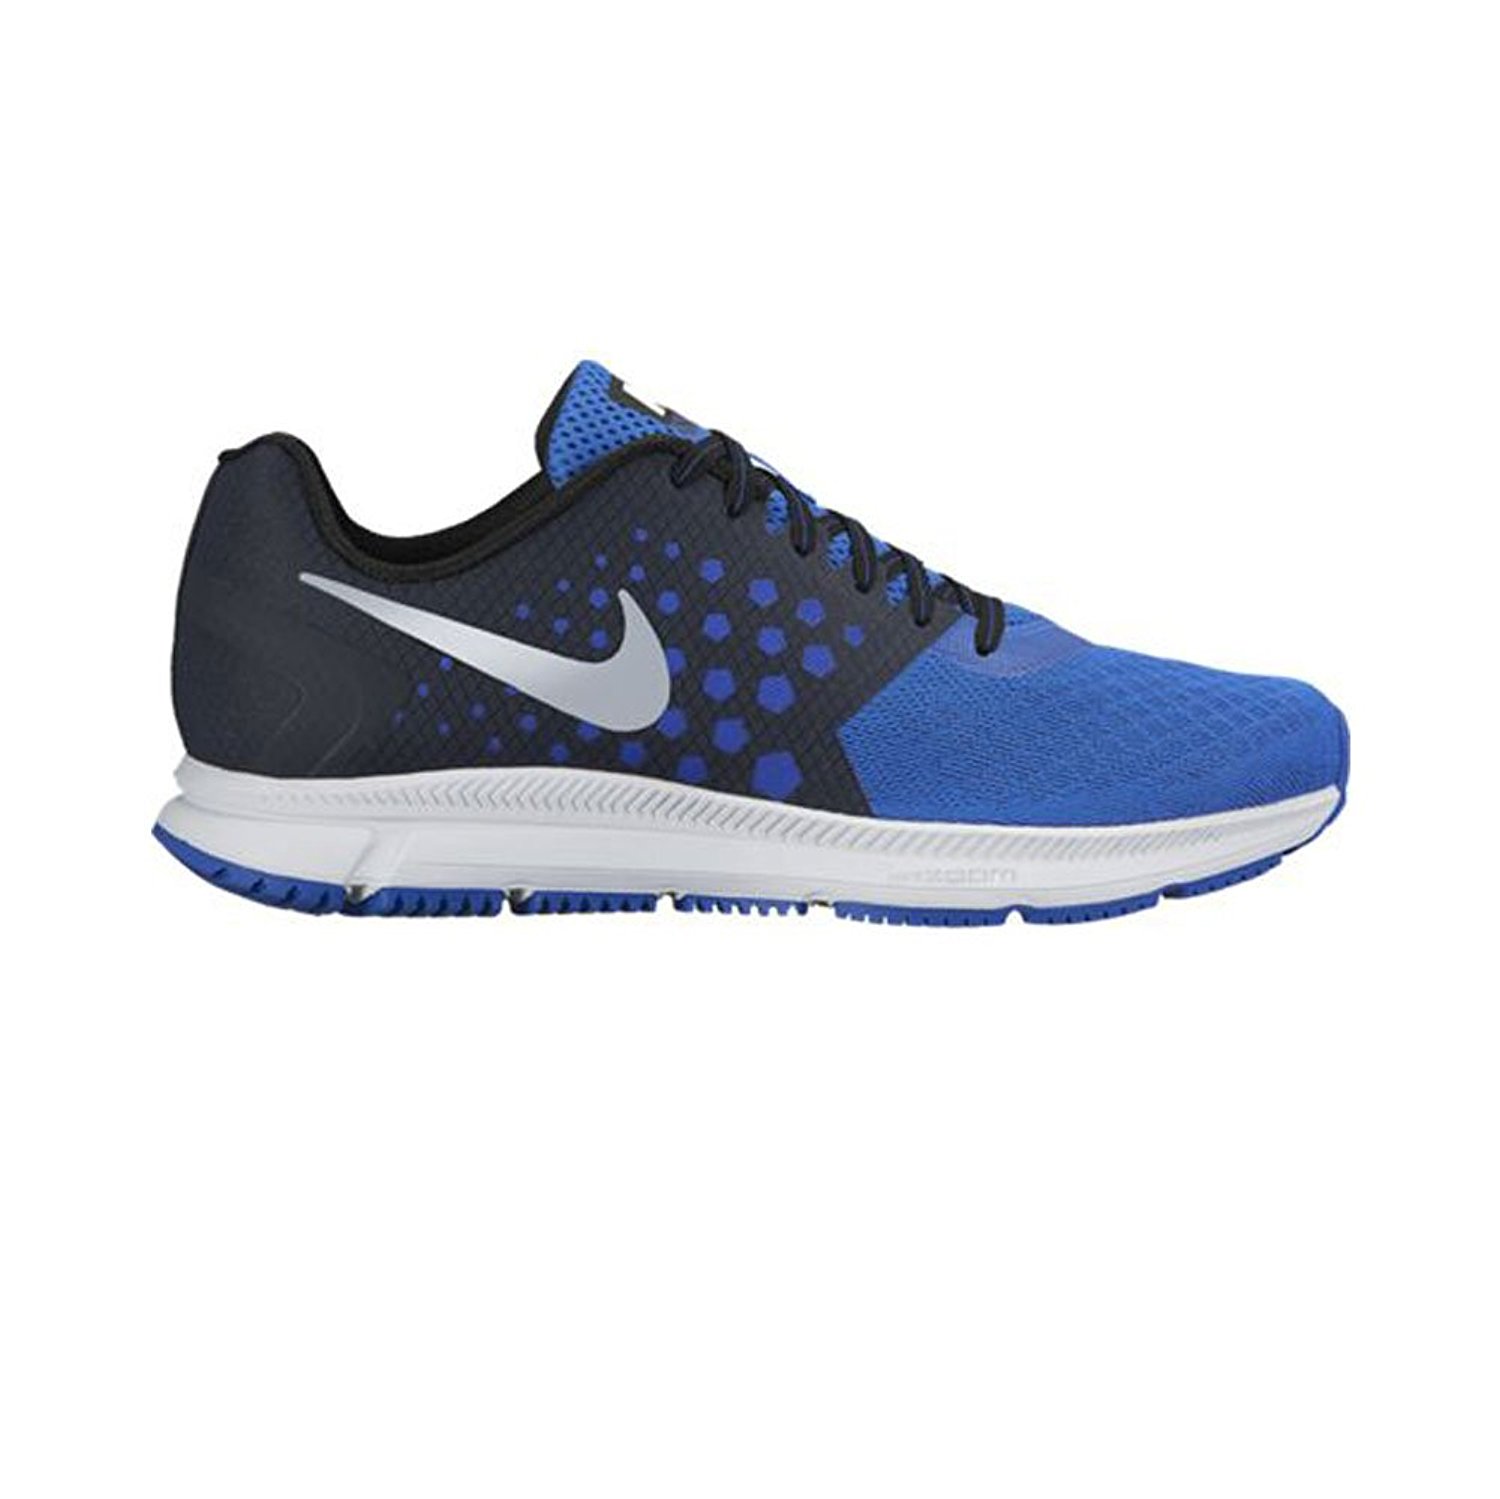 Buy Nike Men'S Zoom Span Blue Running Shoes Online @ ₹8995 from ShopClues